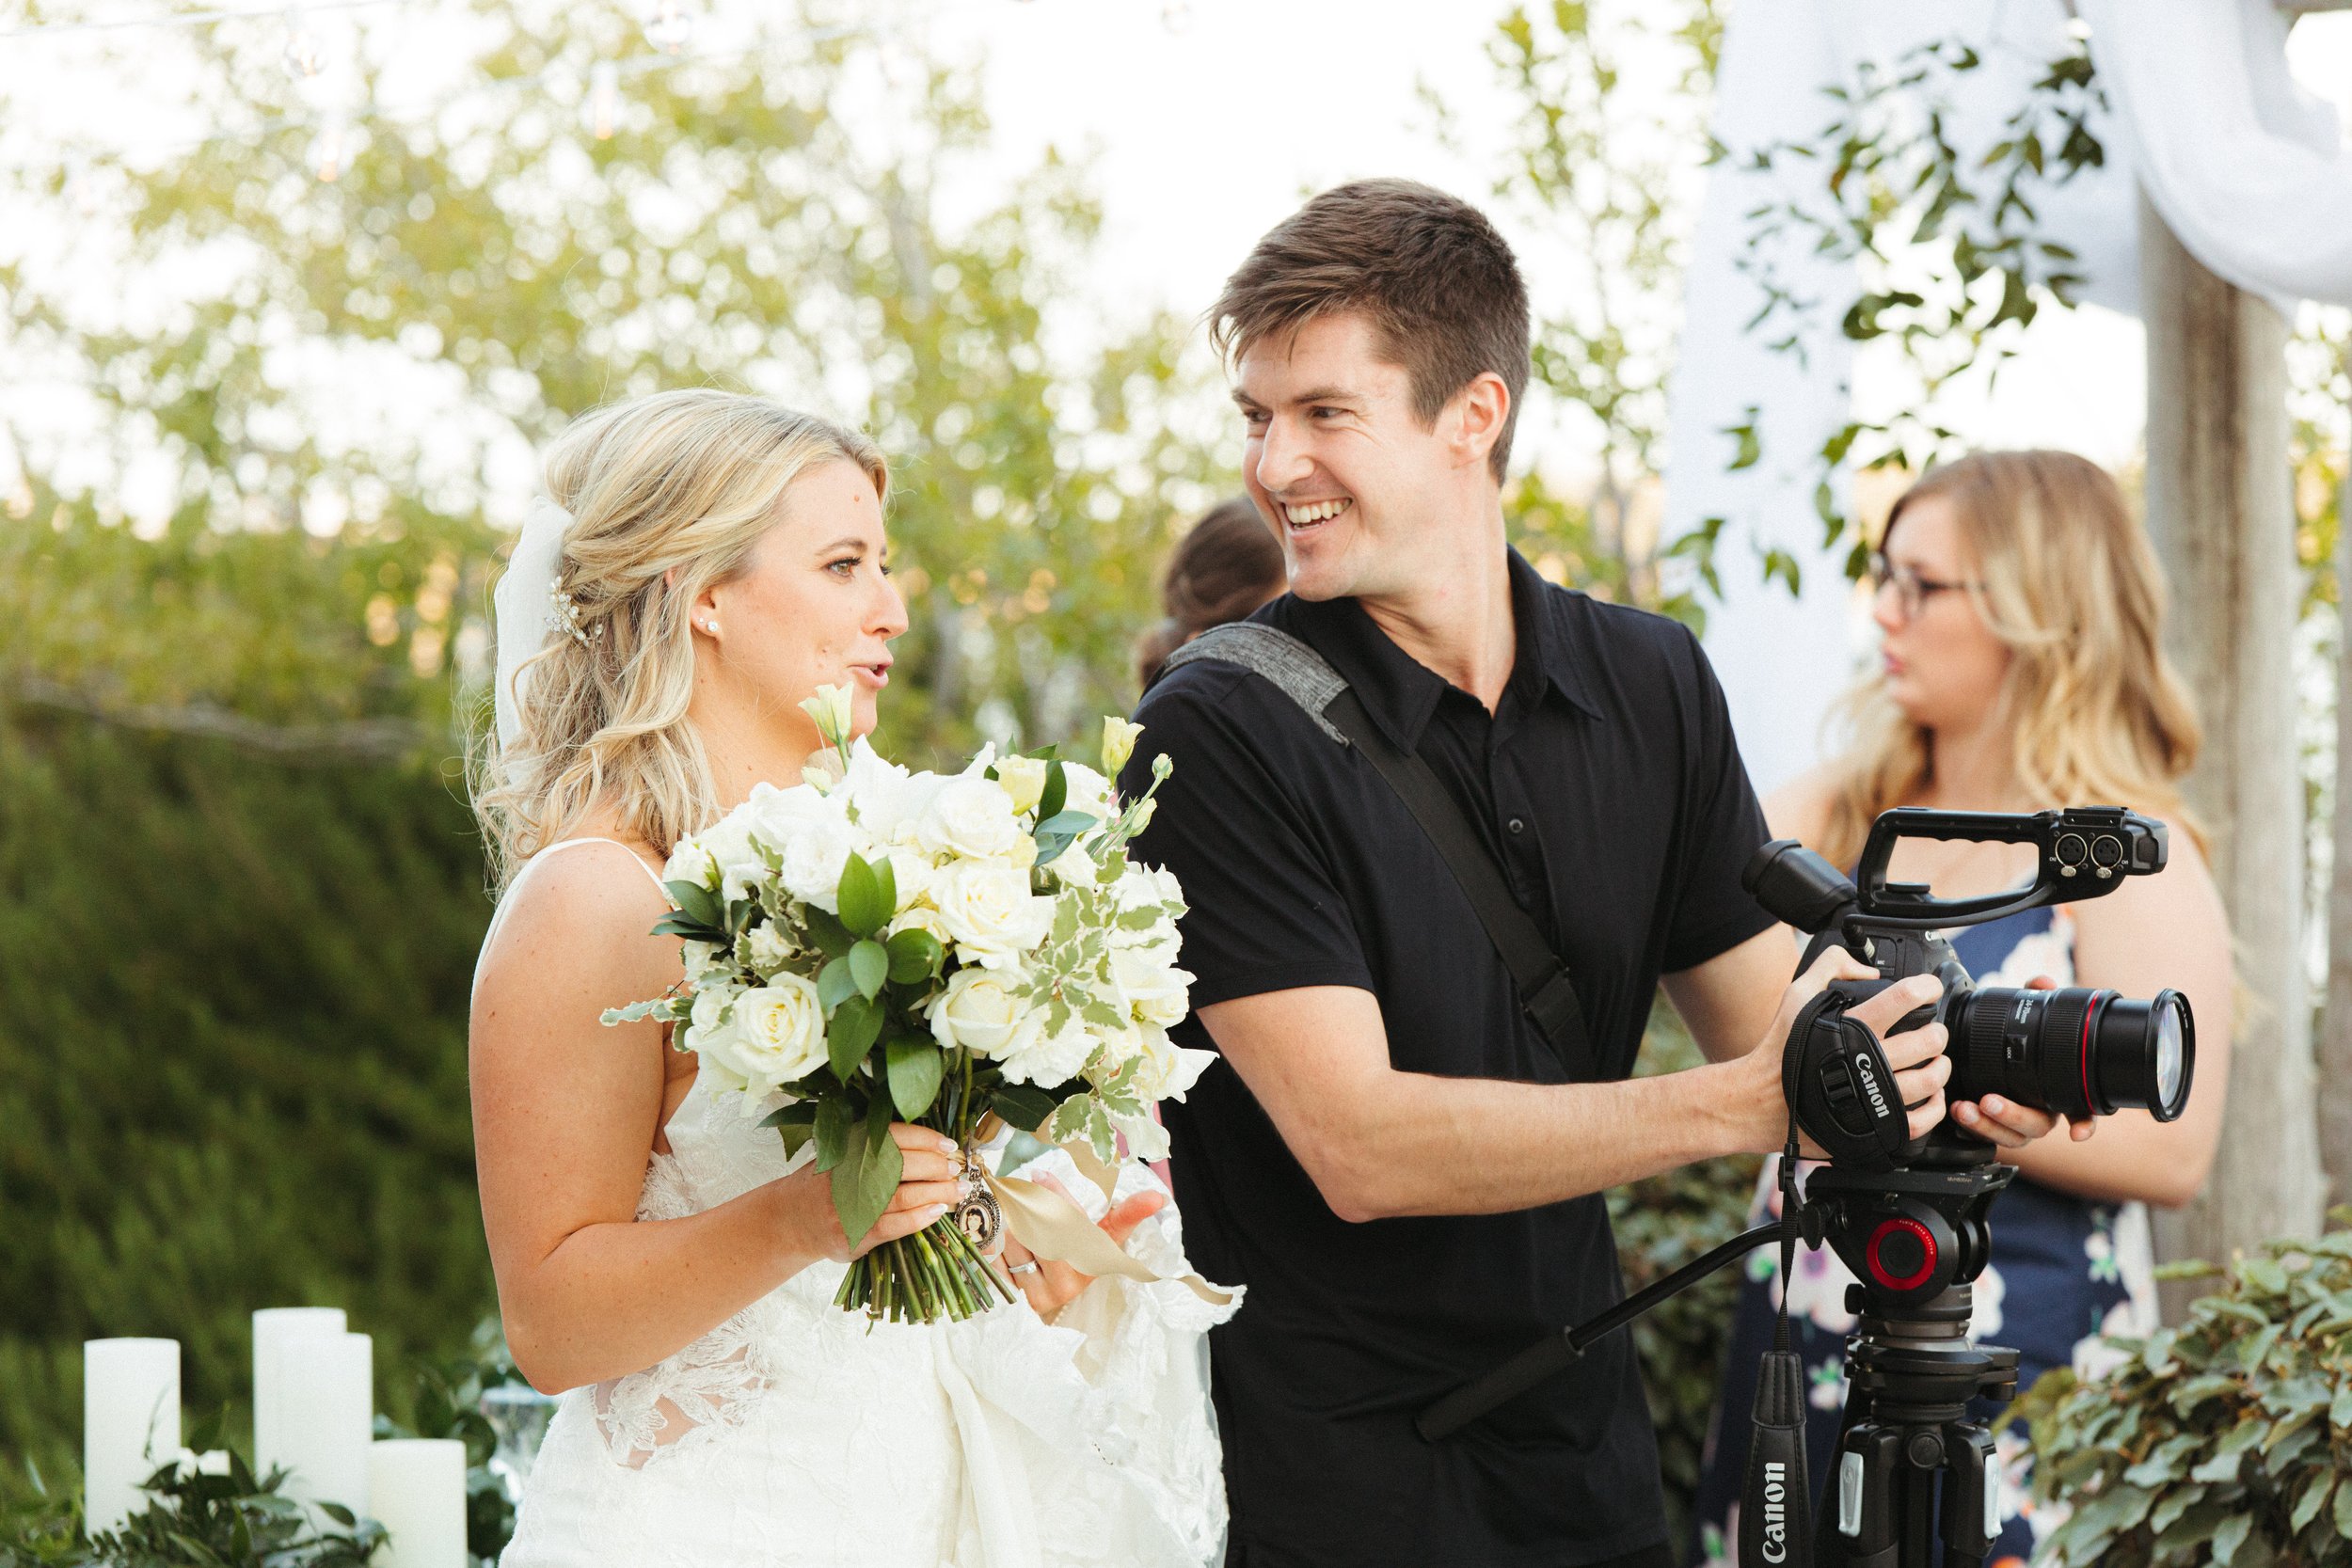 Best Canon camera for wedding videography